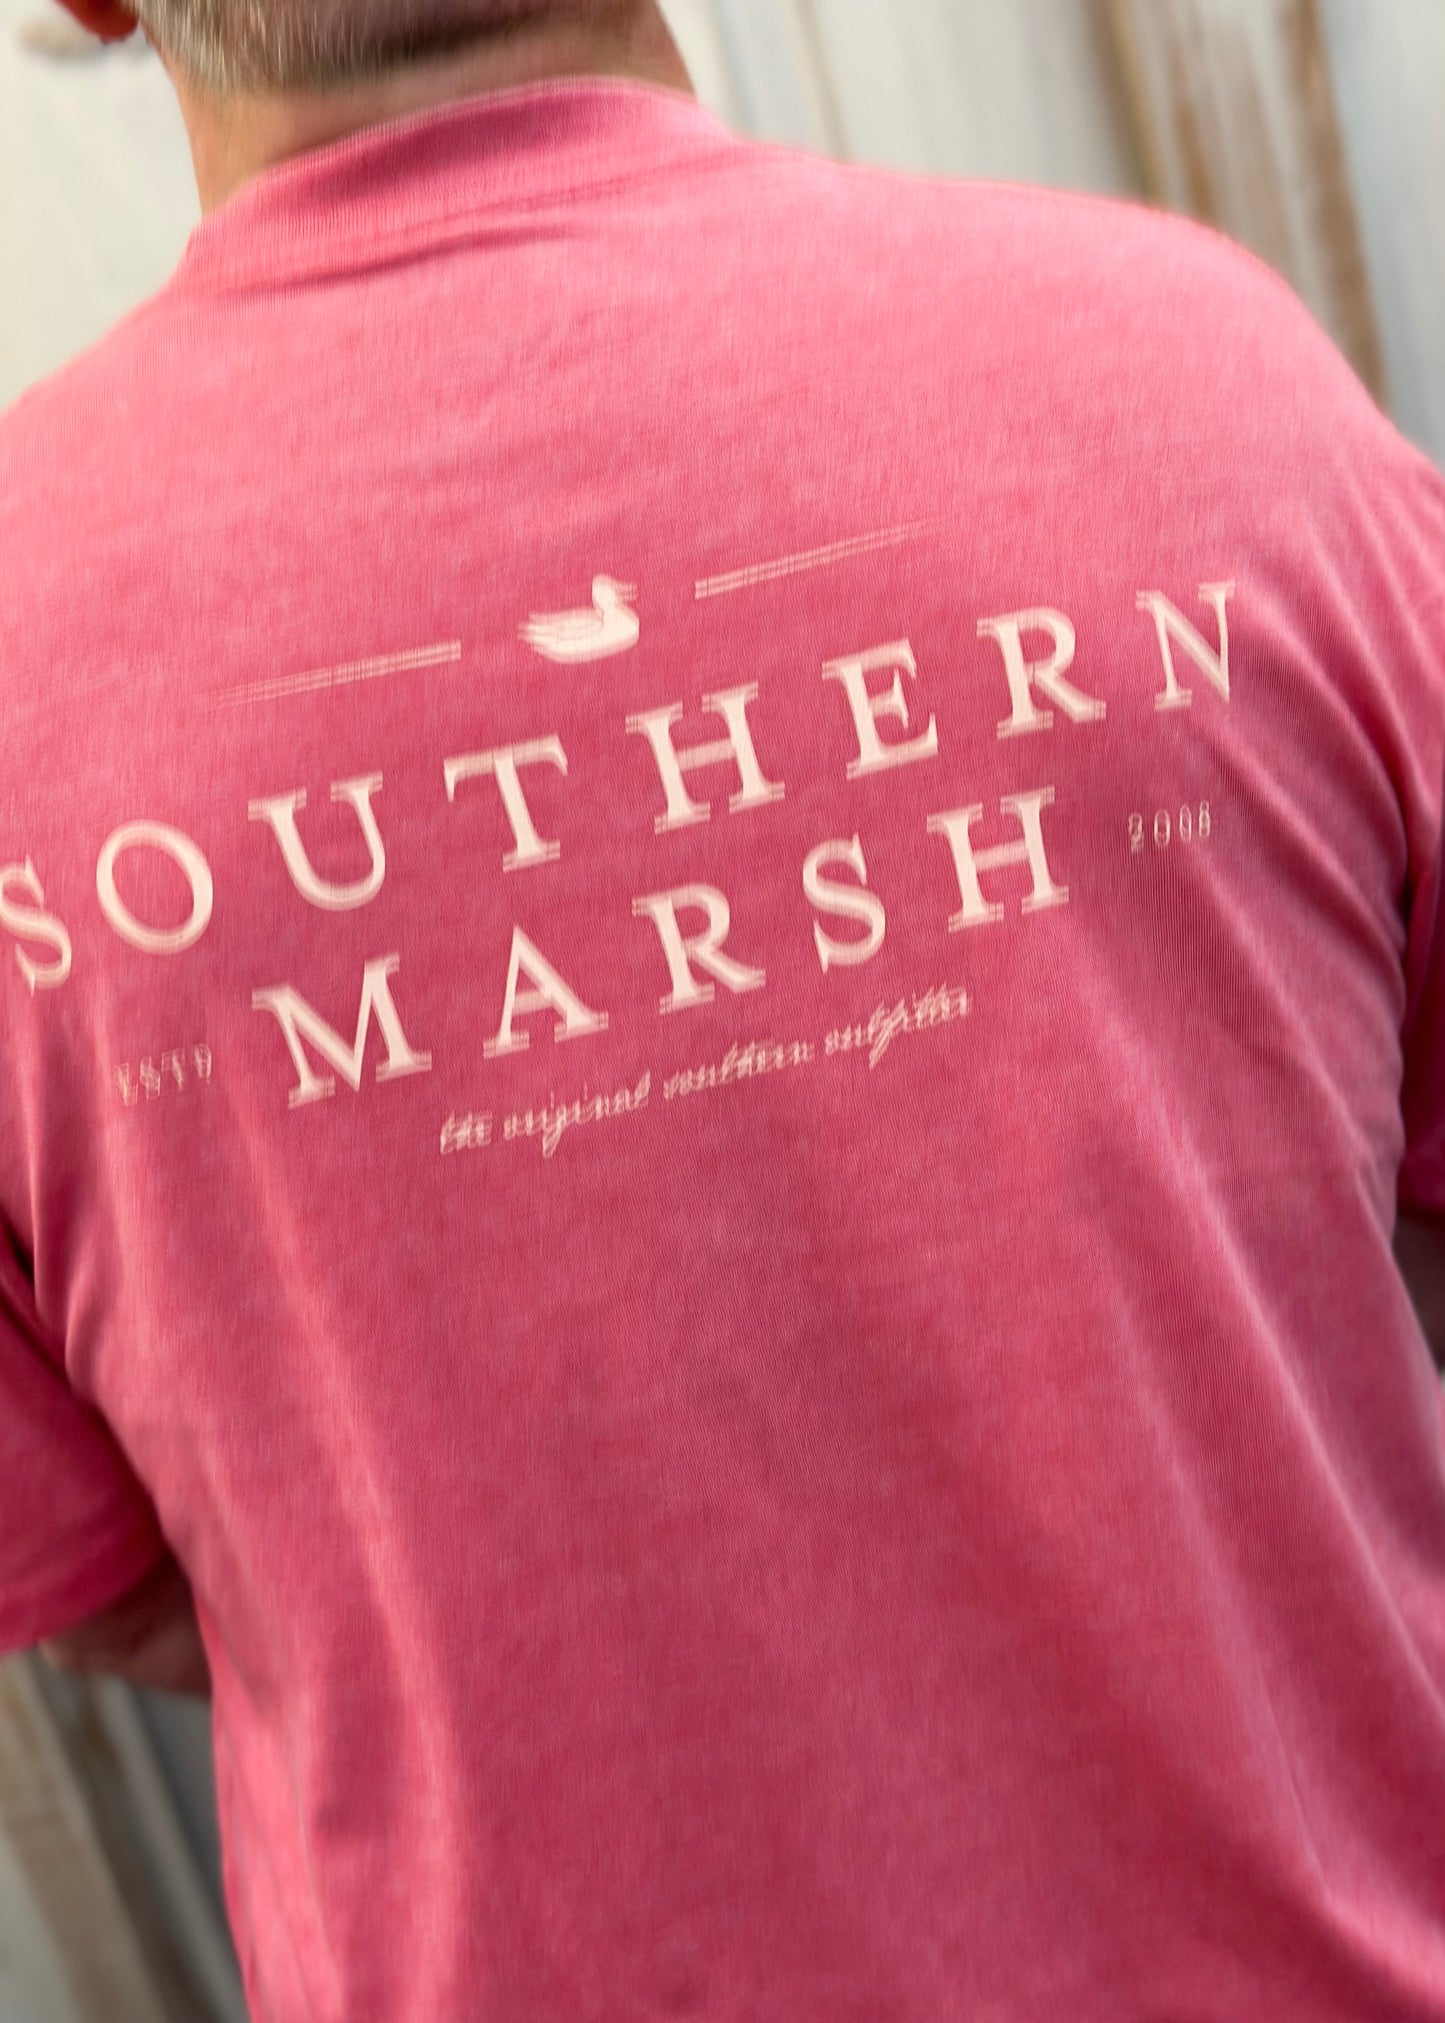 Jim wearing Southern Marsh Seawash Tee - Classic - Strawberry Fizz - Back View close up. Jimberly's Boutique Olive Branch MS